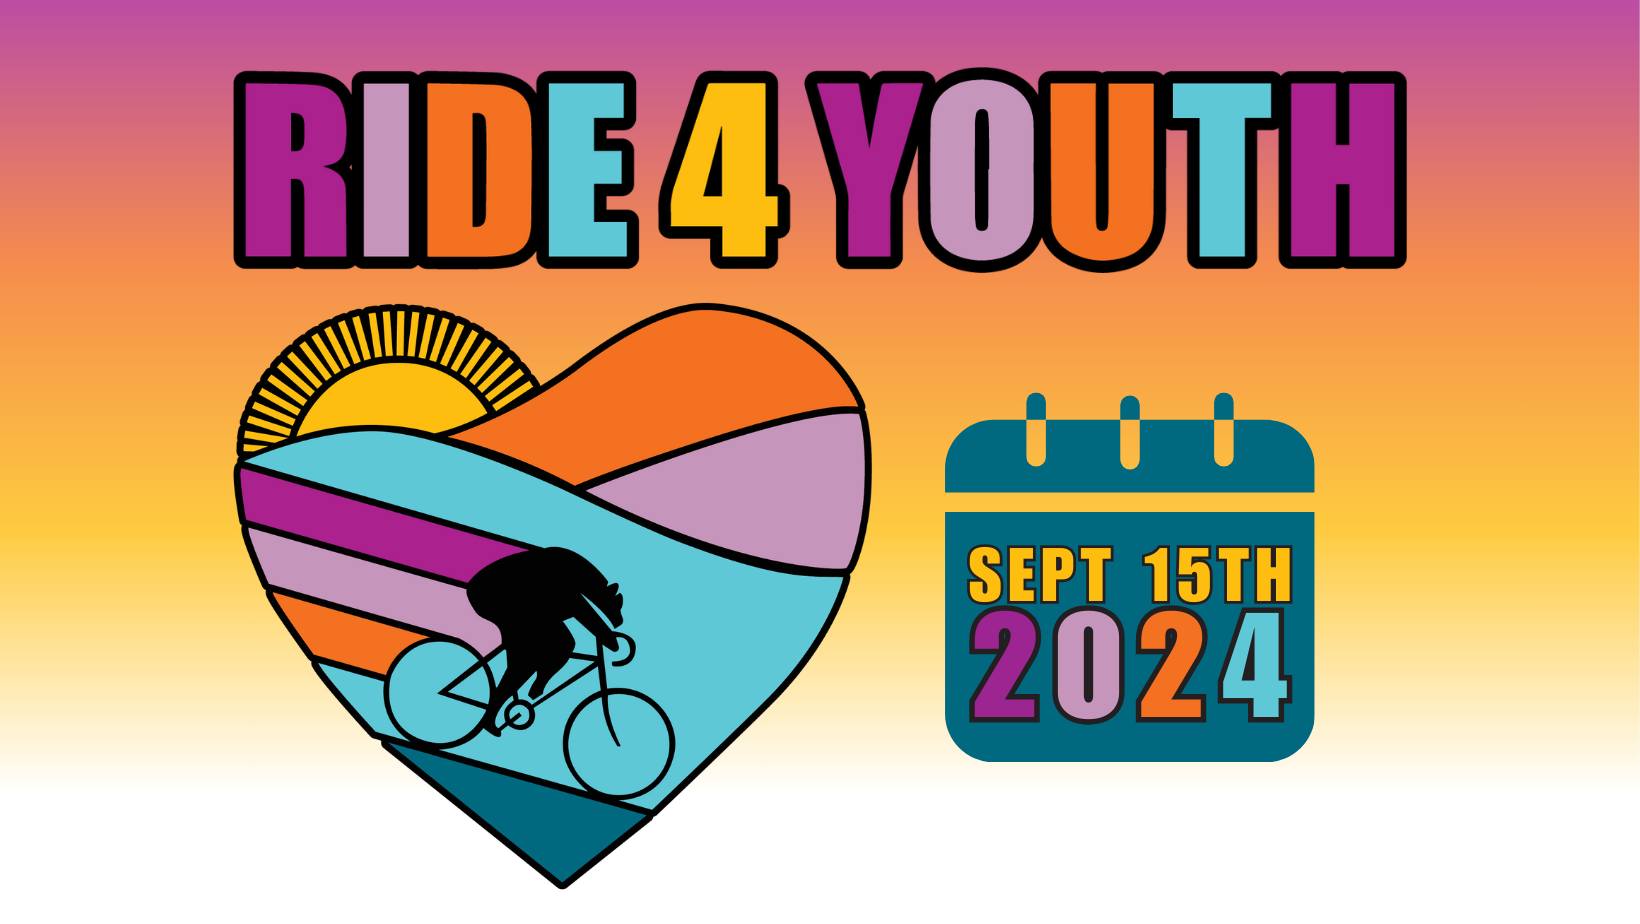 12th Annual Ride 4 Youth